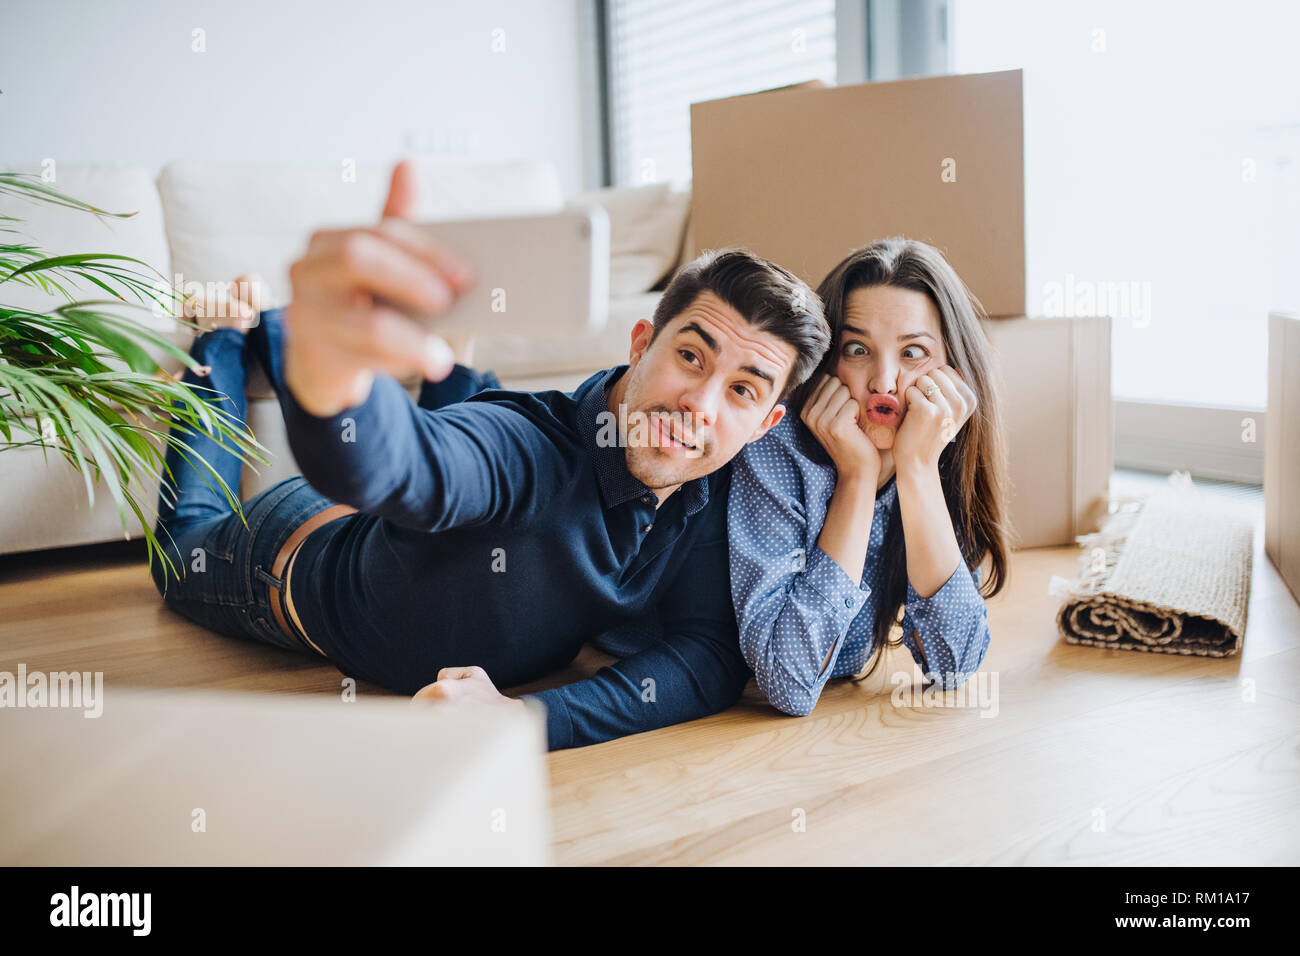 A young couple with a smartphone moving in a new home, taking selfie and making a face. Stock Photo